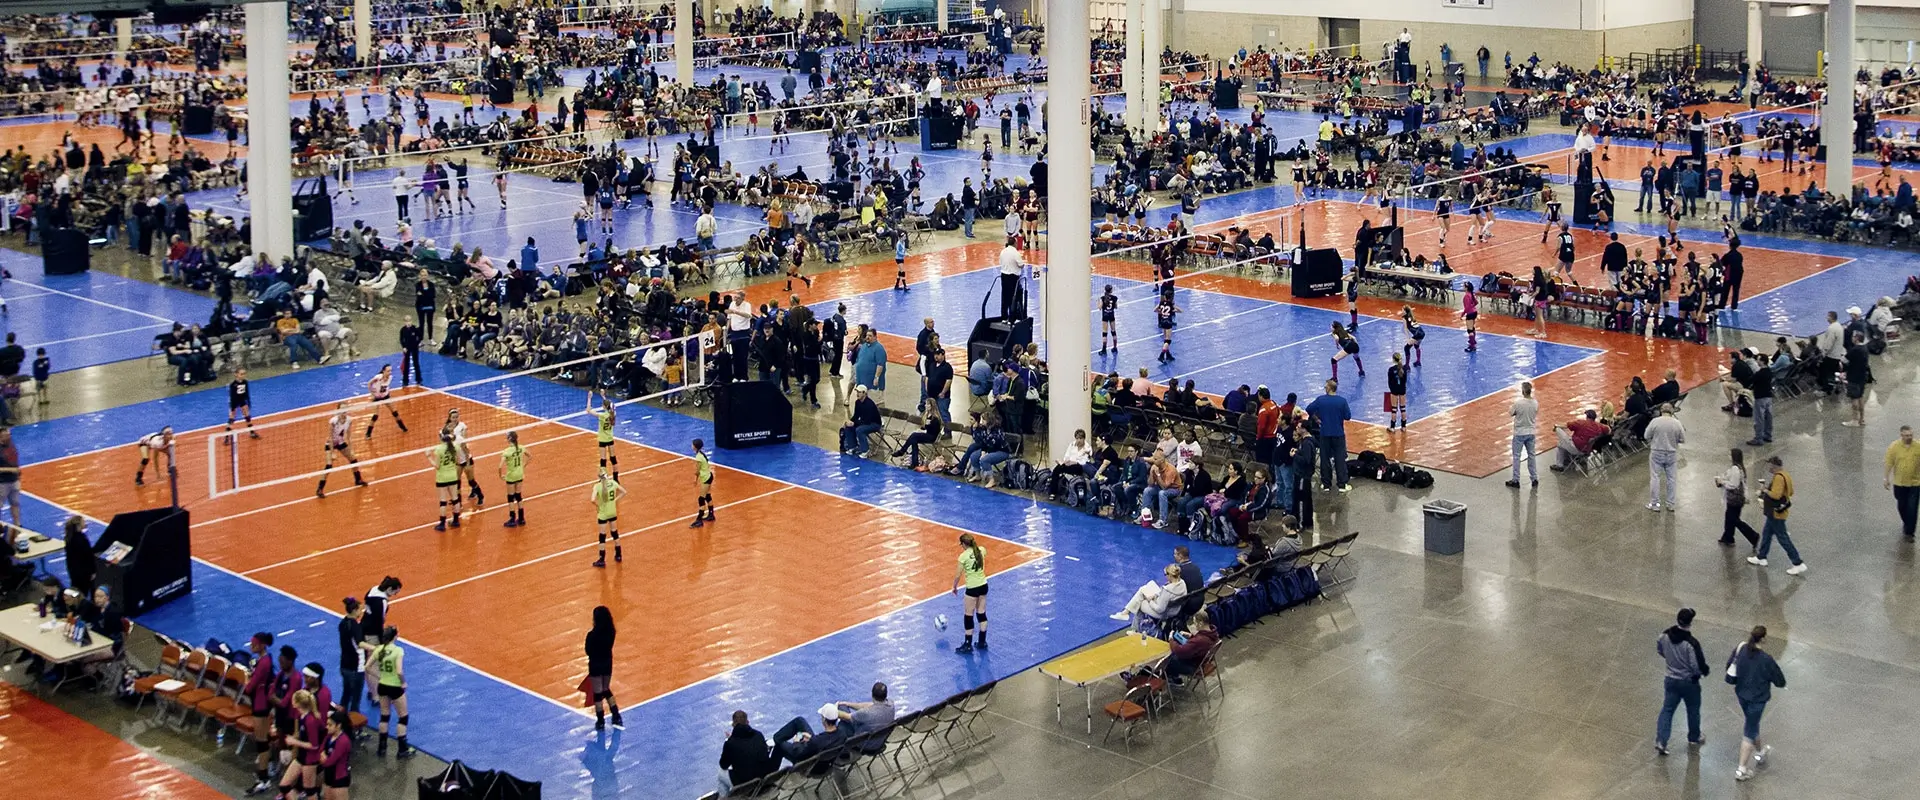 Large volleyball tournament with SnapSports volleyball flooring